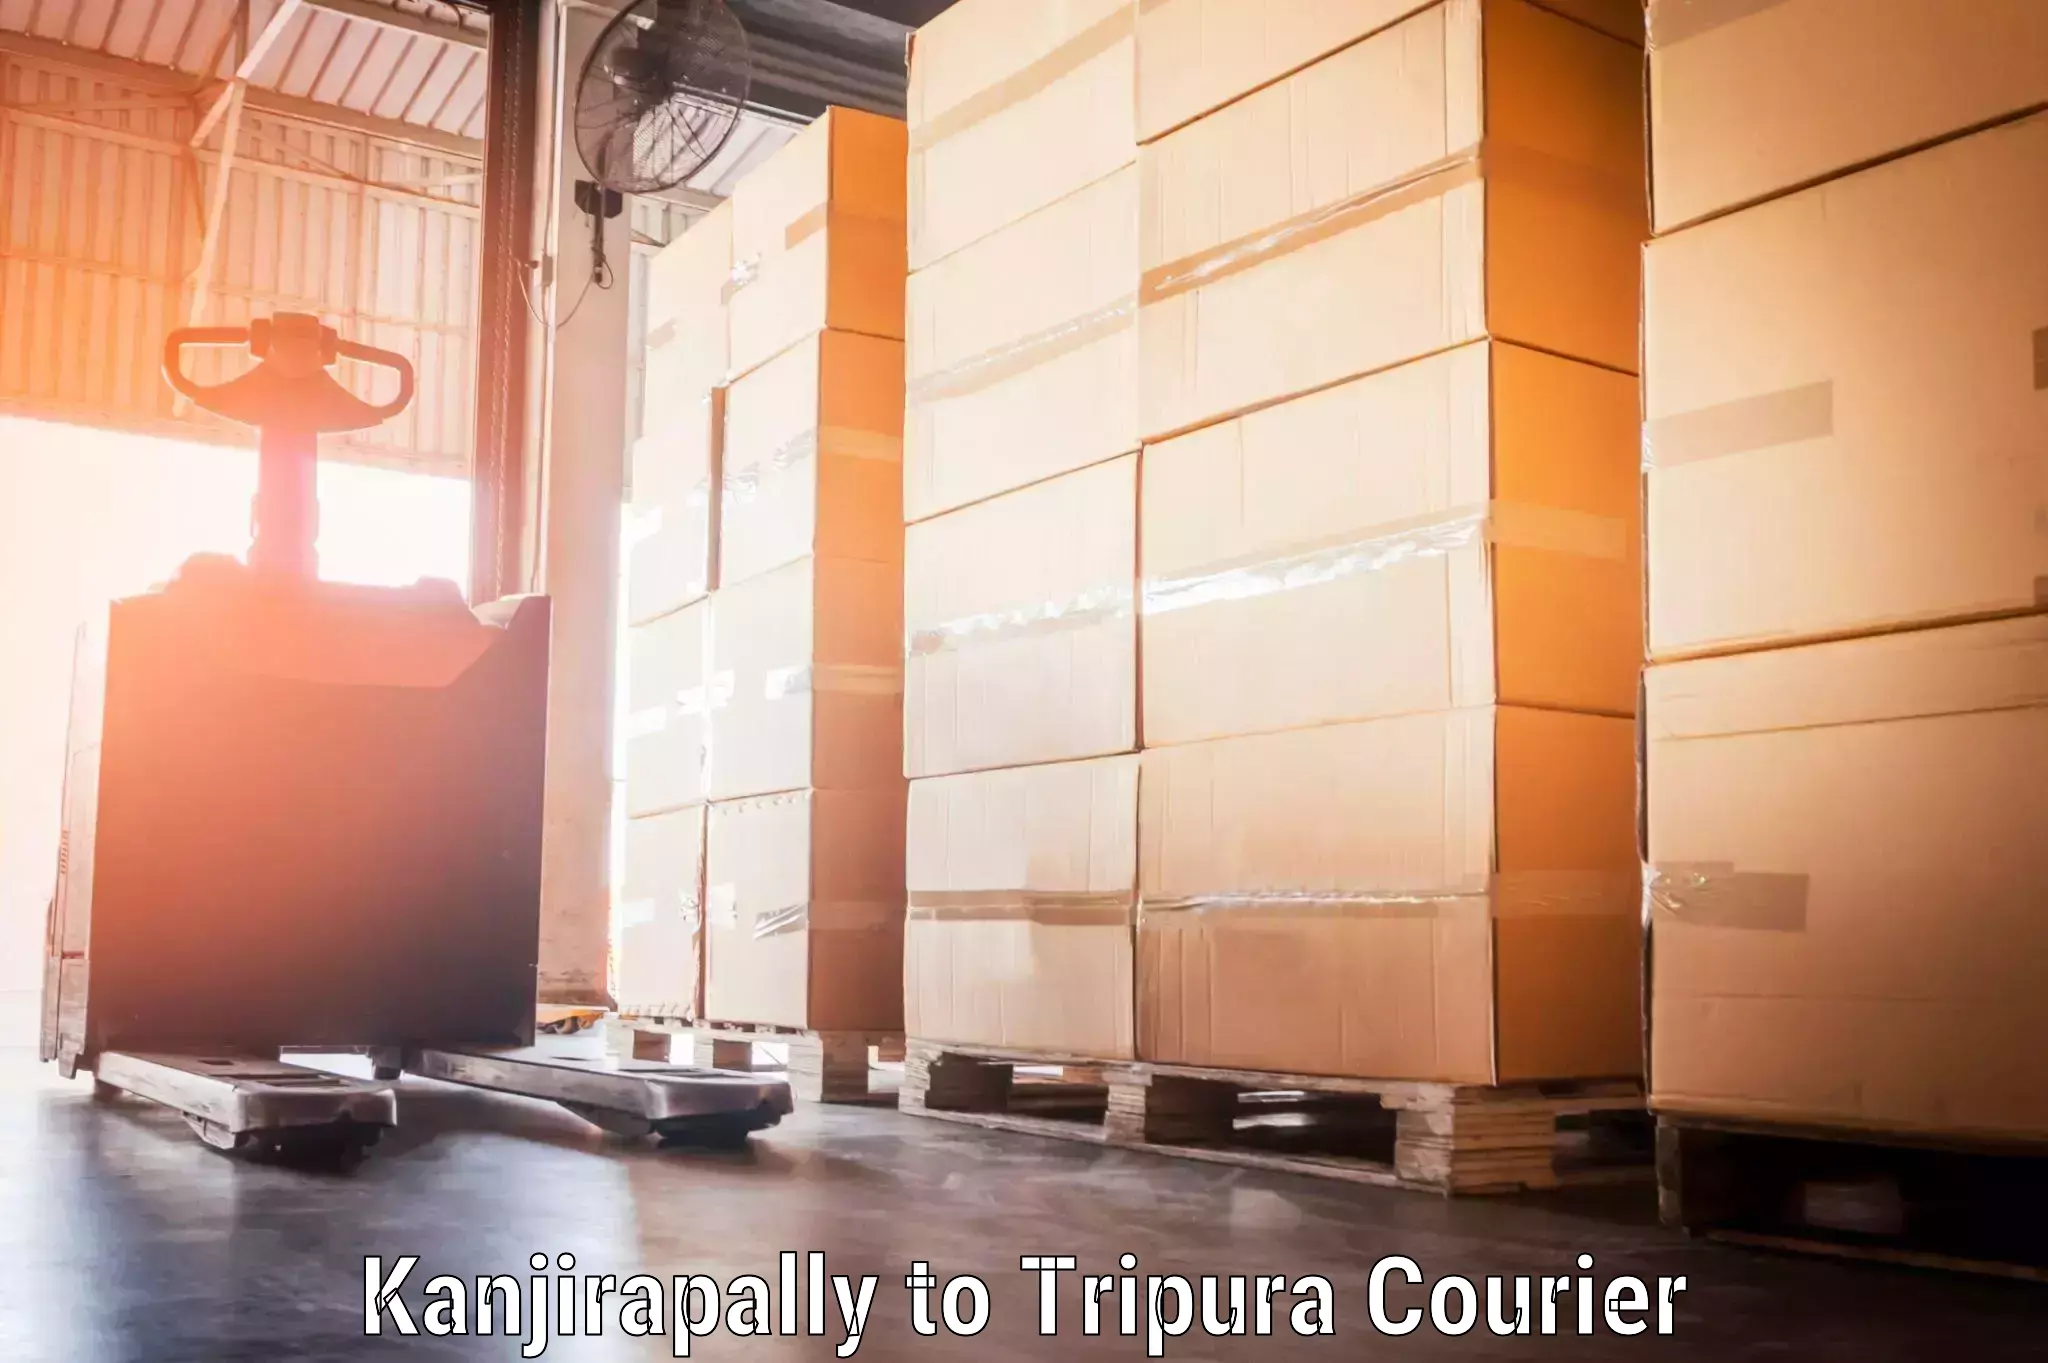 Personal effects shipping Kanjirapally to Udaipur Tripura